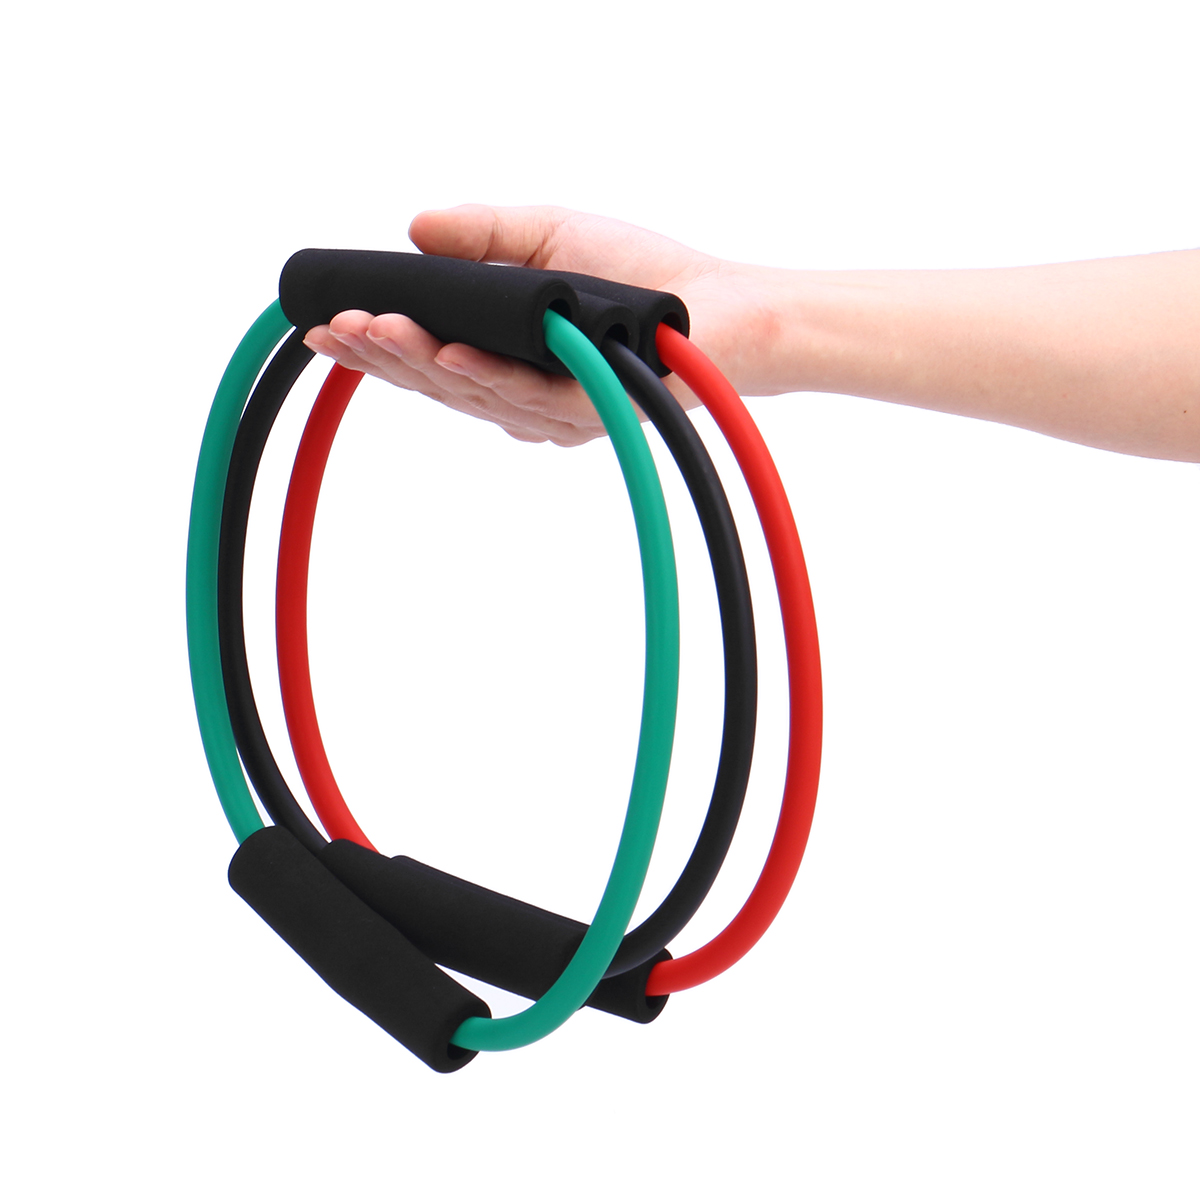 152030lb-Fitness-Resistance-Bands-Gym-Yoga-Pull-Rope-Gym-Exercise-Training-Workout-Tools-1684050-8